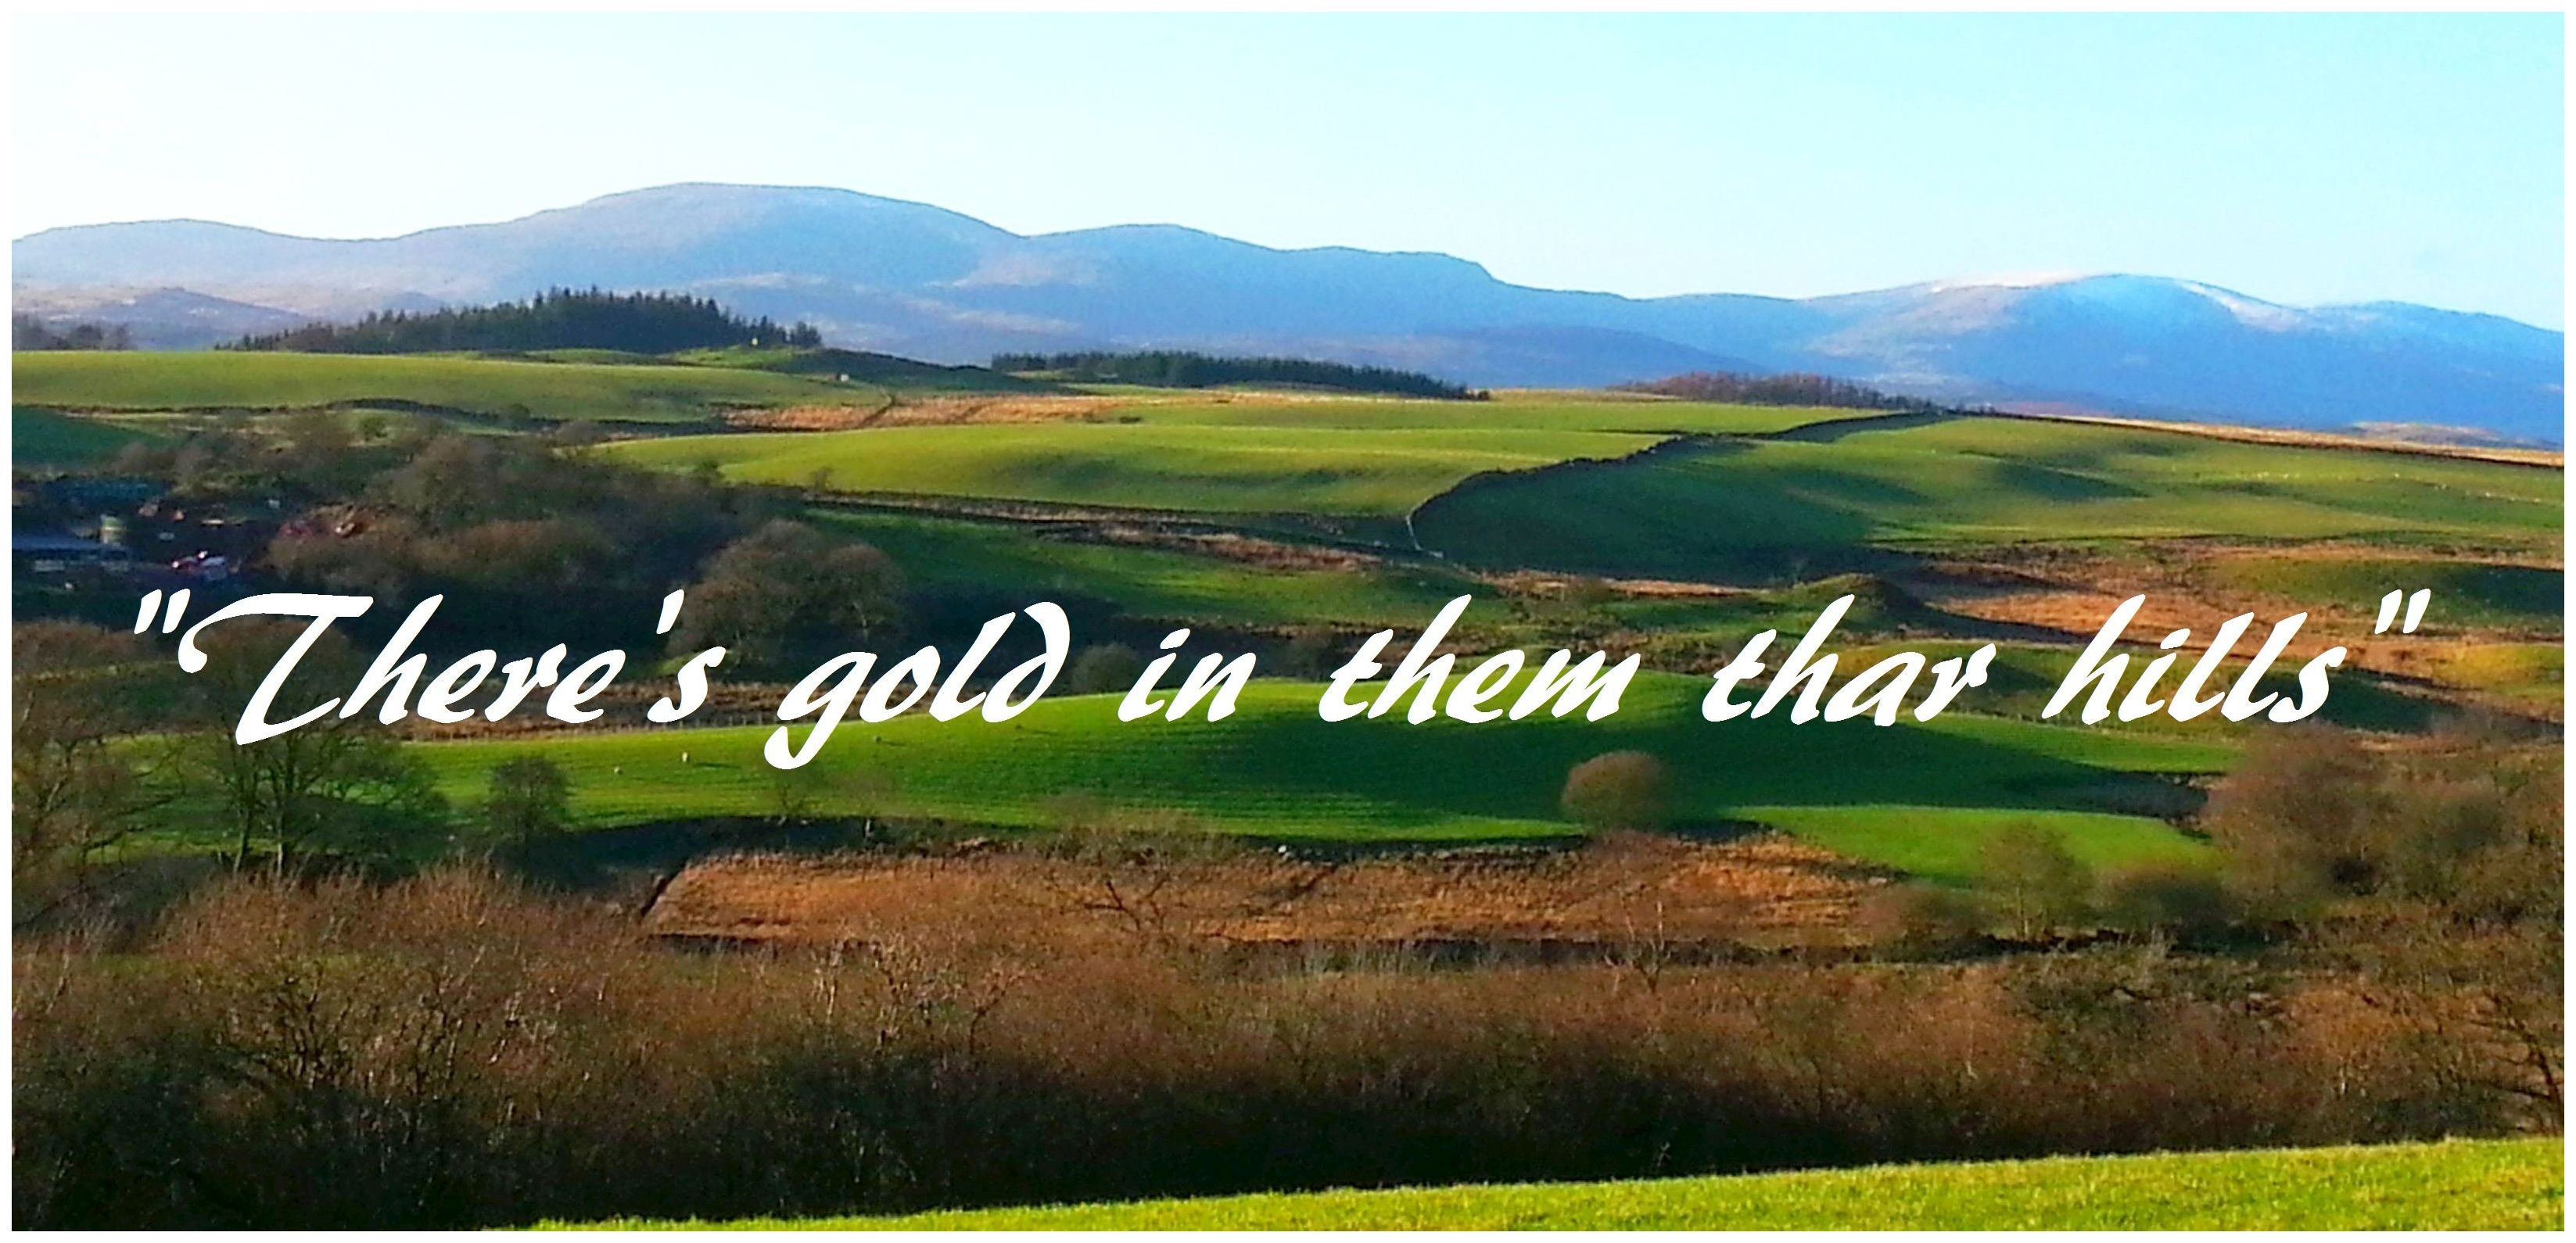 Theres gold in them thar hills